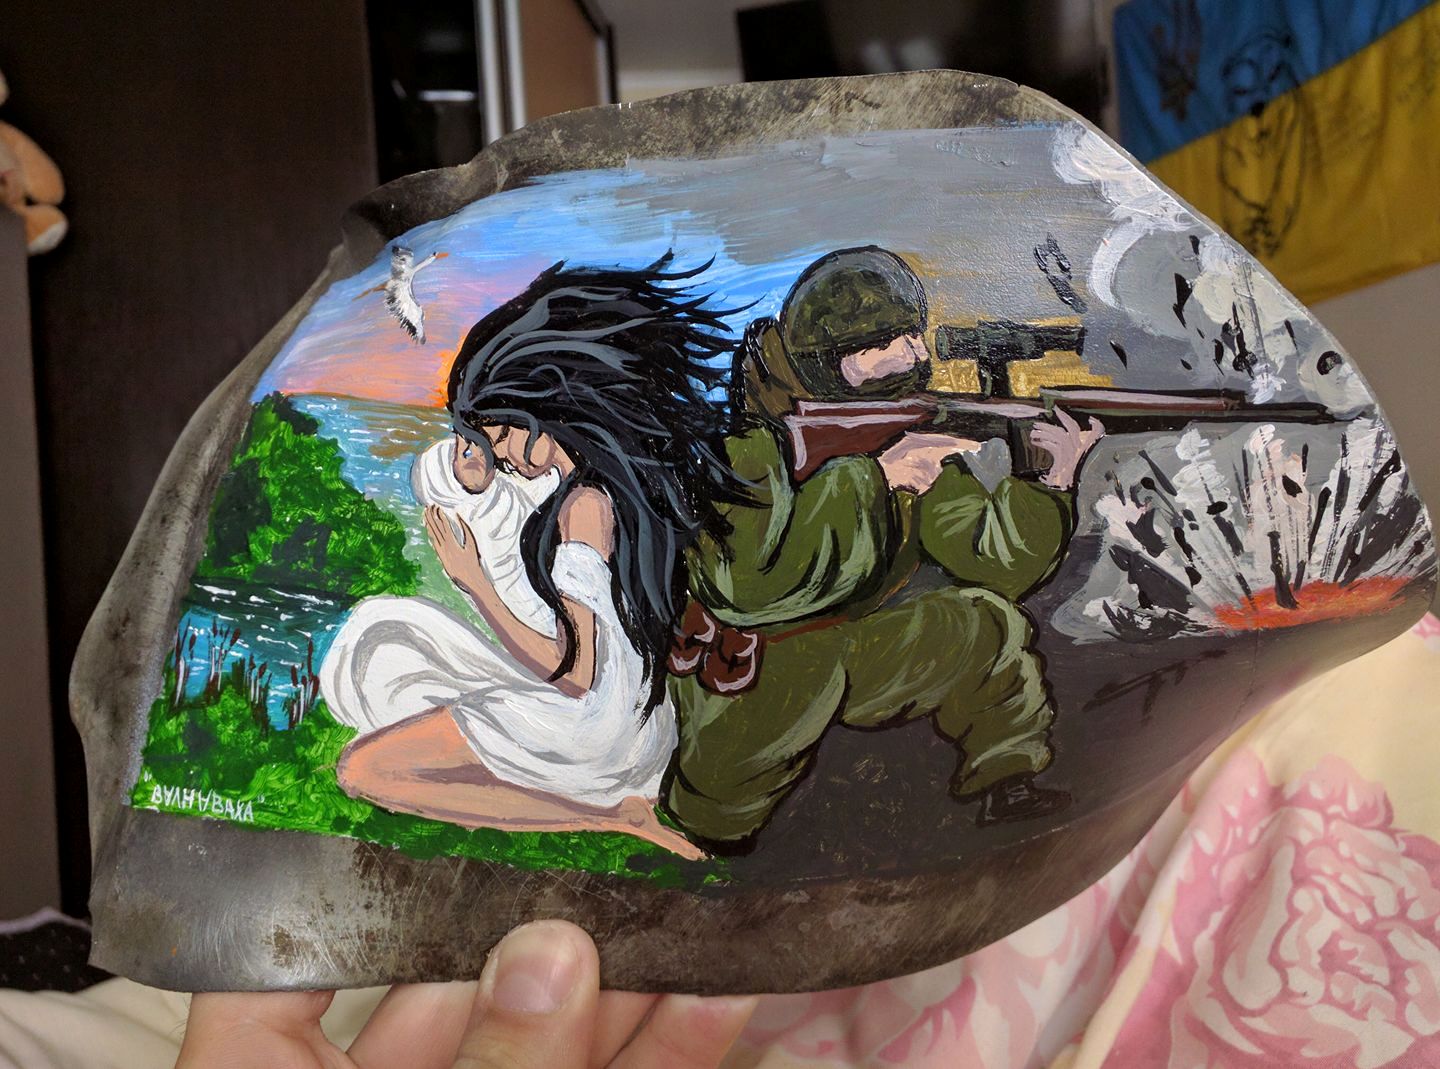 Donbas war refugee turns shrapnel into works of art to raise funds for Ukrainian army ~~